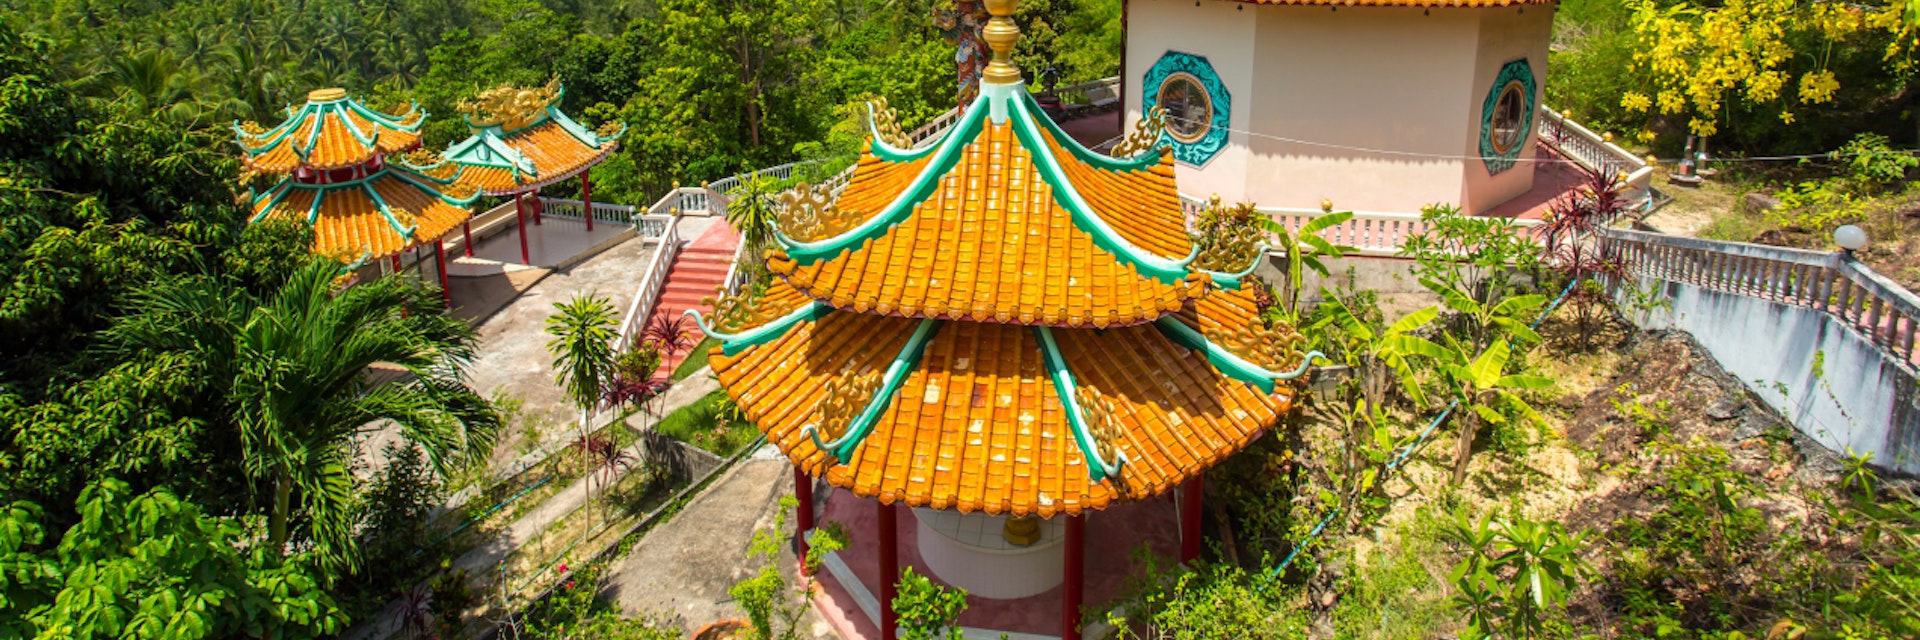 Kuan yin, chinese temple overlooking Chaloklum Bay at Koh Phangan, Thailand; Shutterstock ID 197205806; Your name (First / Last): Josh Vogel; GL account no.: 56530; Netsuite department name: Online Design; Full Product or Project name including edition: Digital Content/Sights